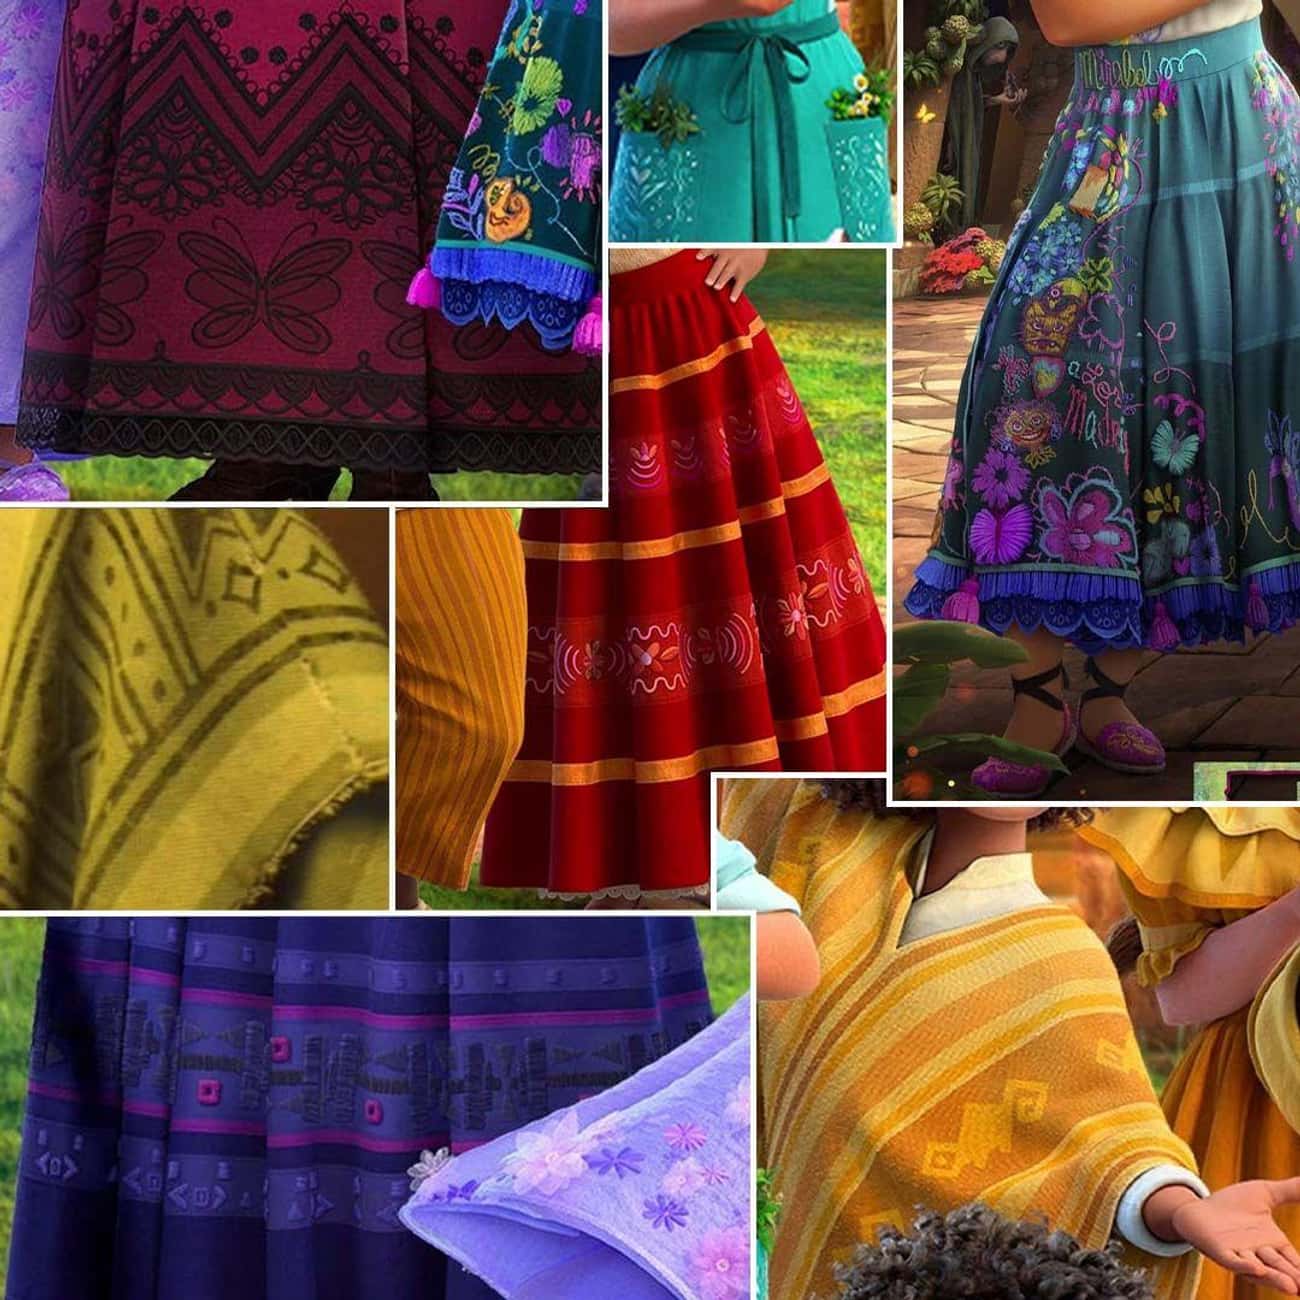 The Insane Details In All The Clothes